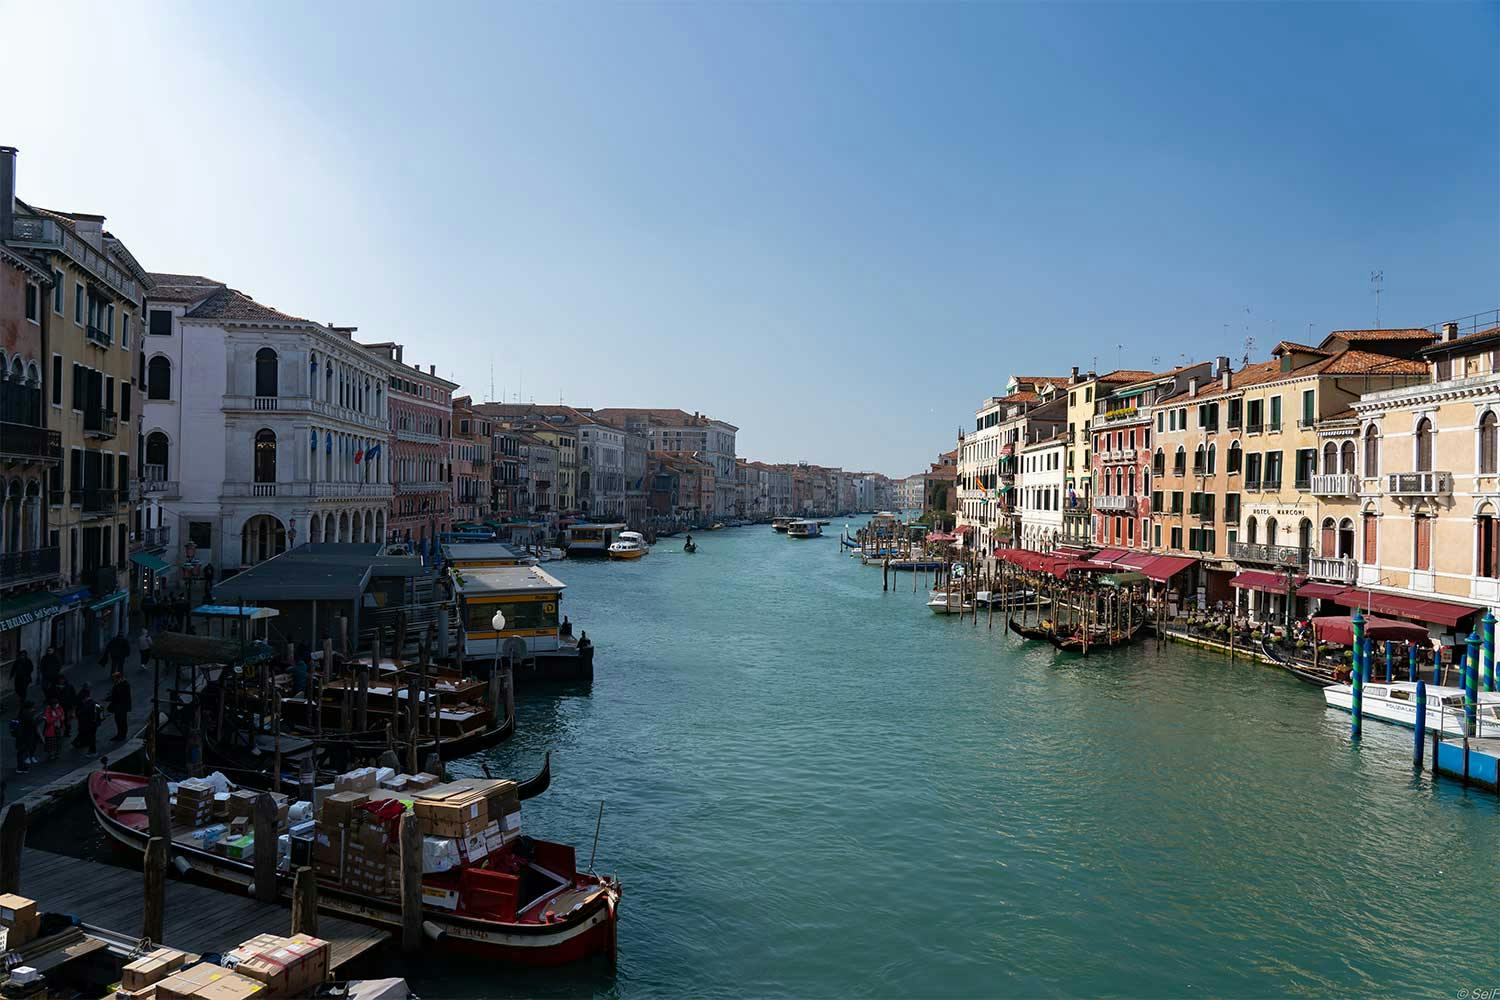 The grand canal in Venice extends into the distance, flanked by earth-toned buildings boats docked in front of them.